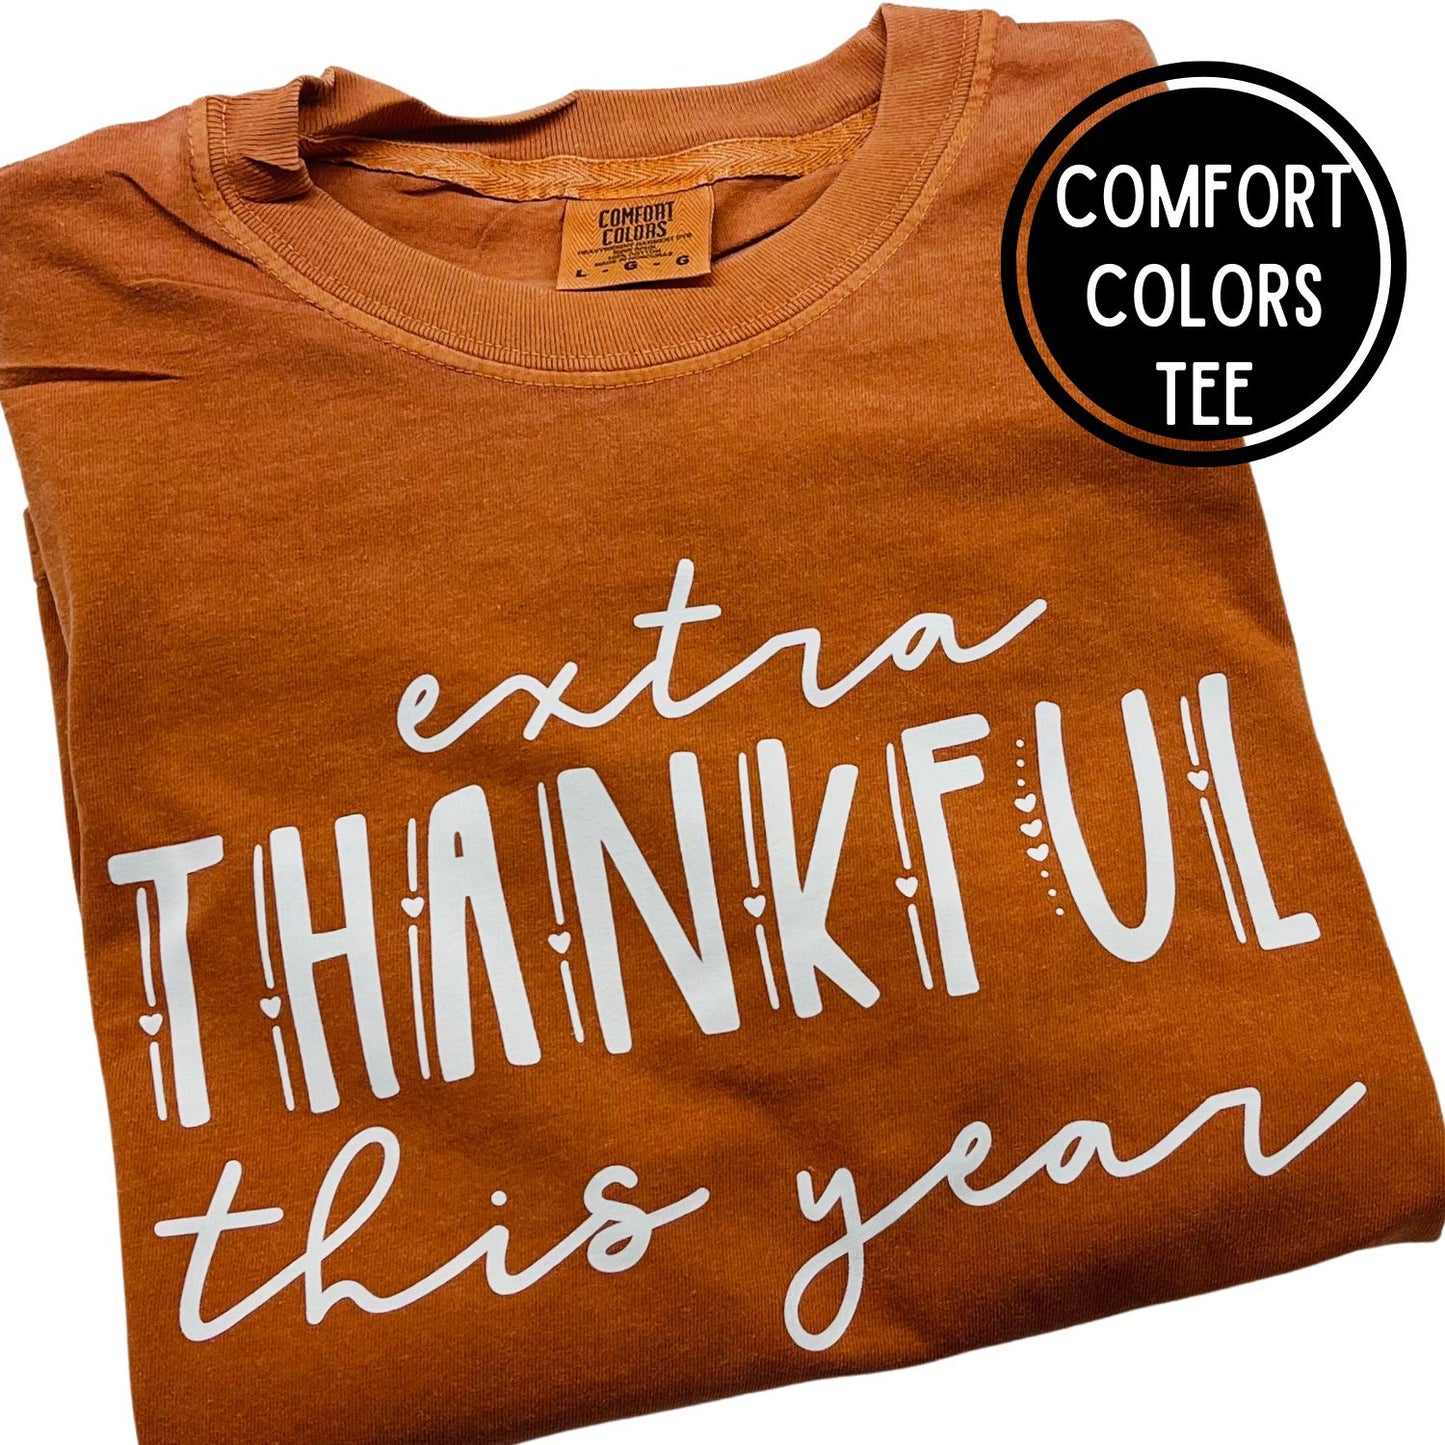 Extra Thankful This Year - Comfort Colors Tee